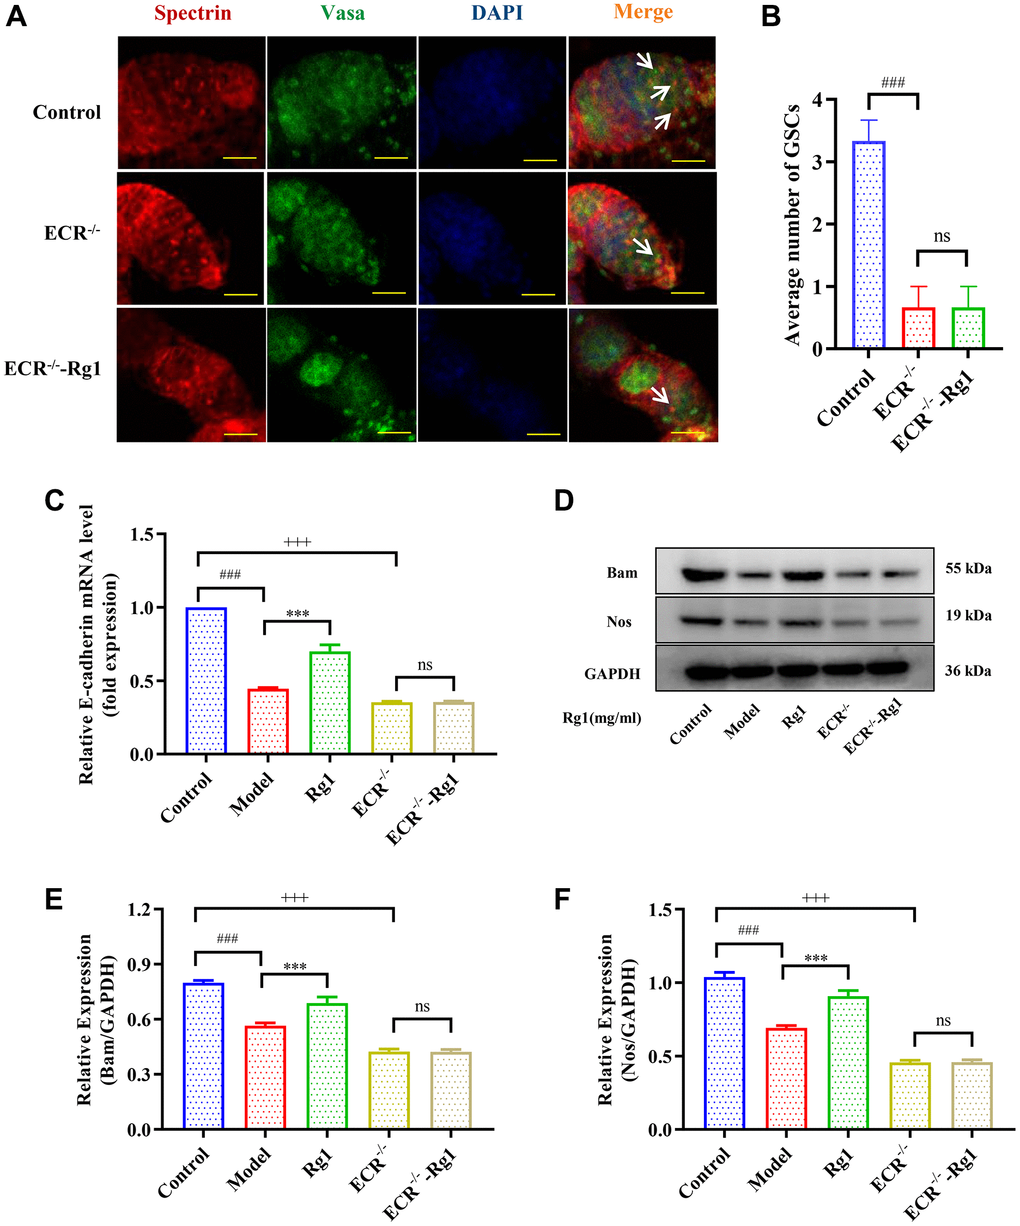 Effects of ginsenoside Rg1 on GSCs niche in ECR mutant Drosophila. (A) GSCs are labeled with α-spectrin antibody (red, fusions), Vasa antibody (green, germ cells), and DAPI (blue, nuclei), Scale bar: 10 μm; (B) Average number of GSCs; (C) Relative mRNA-level expression of gene E-cadherin (n = 100); (D) Western blotting analysis of expression of Bam and Nos; (E) Relative expression levels of Bam (n = 100); (F) Relative expression levels of Nos (n = 100); GAPDH antibody was used as loading Control. Results were analysed with one-way ANOVA. Data are shown as the mean ± SD (n = 100); ###p Drosophila); ***p Drosophila); +++p Drosophila); Abbreviation: ns: no significance.